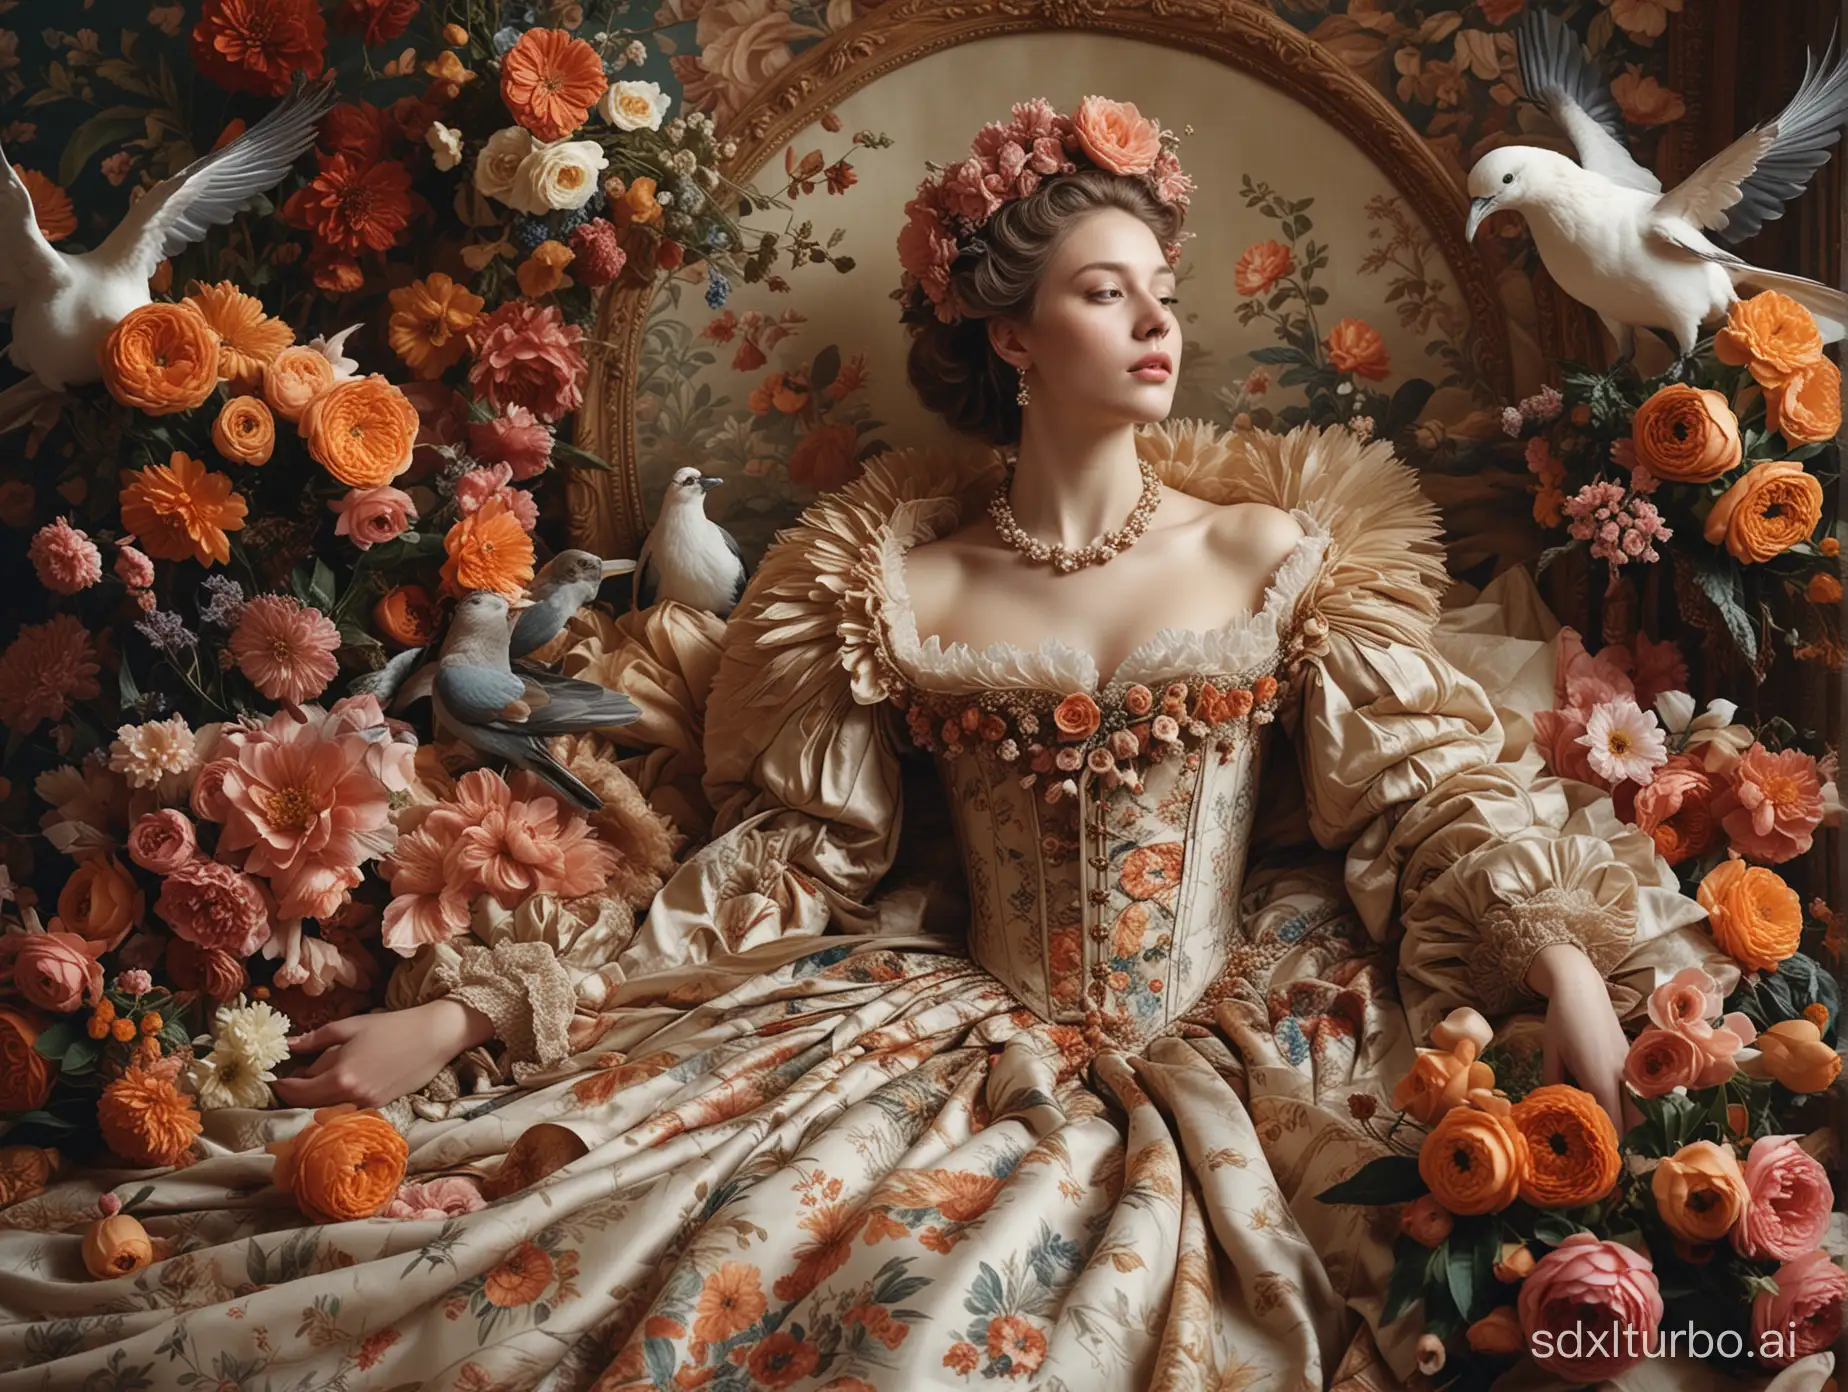 a beautiful and intricate image that seems to blend elements of classical art with a modern, almost surreal aesthetic. The central figure appears to be a woman, styled in a way reminiscent of the European Renaissance or Baroque periods, reclining with a serene, almost otherworldly expression. Her clothing and the ruff collar enhance this historical impression. Surrounding her are oversized flowers and a couple of birds in mid-flight, which add a touch of natural beauty and vitality. The colors are rich and earthy, and the level of detail in the textures, from the floral patterns on the fabric to the individual petals and feathers, is quite remarkable. This composition feels both timeless and contemporary, inviting viewers into a moment of tranquil beauty.